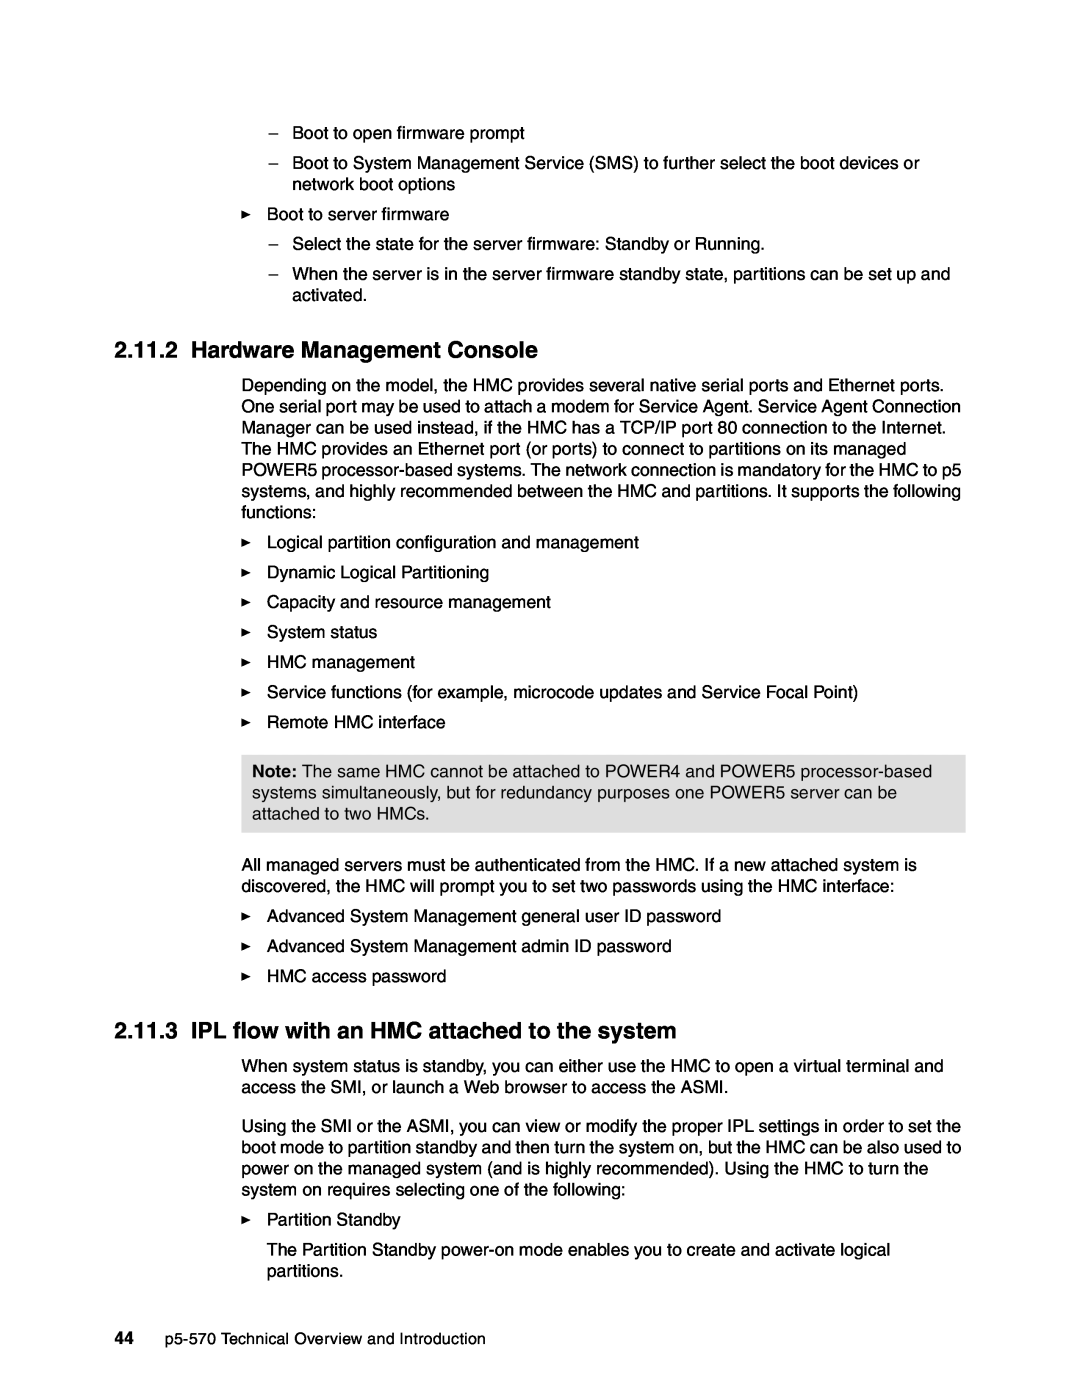 IBM P5 570 manual 2.11.2Hardware Management Console, 2.11.3IPL flow with an HMC attached to the system 